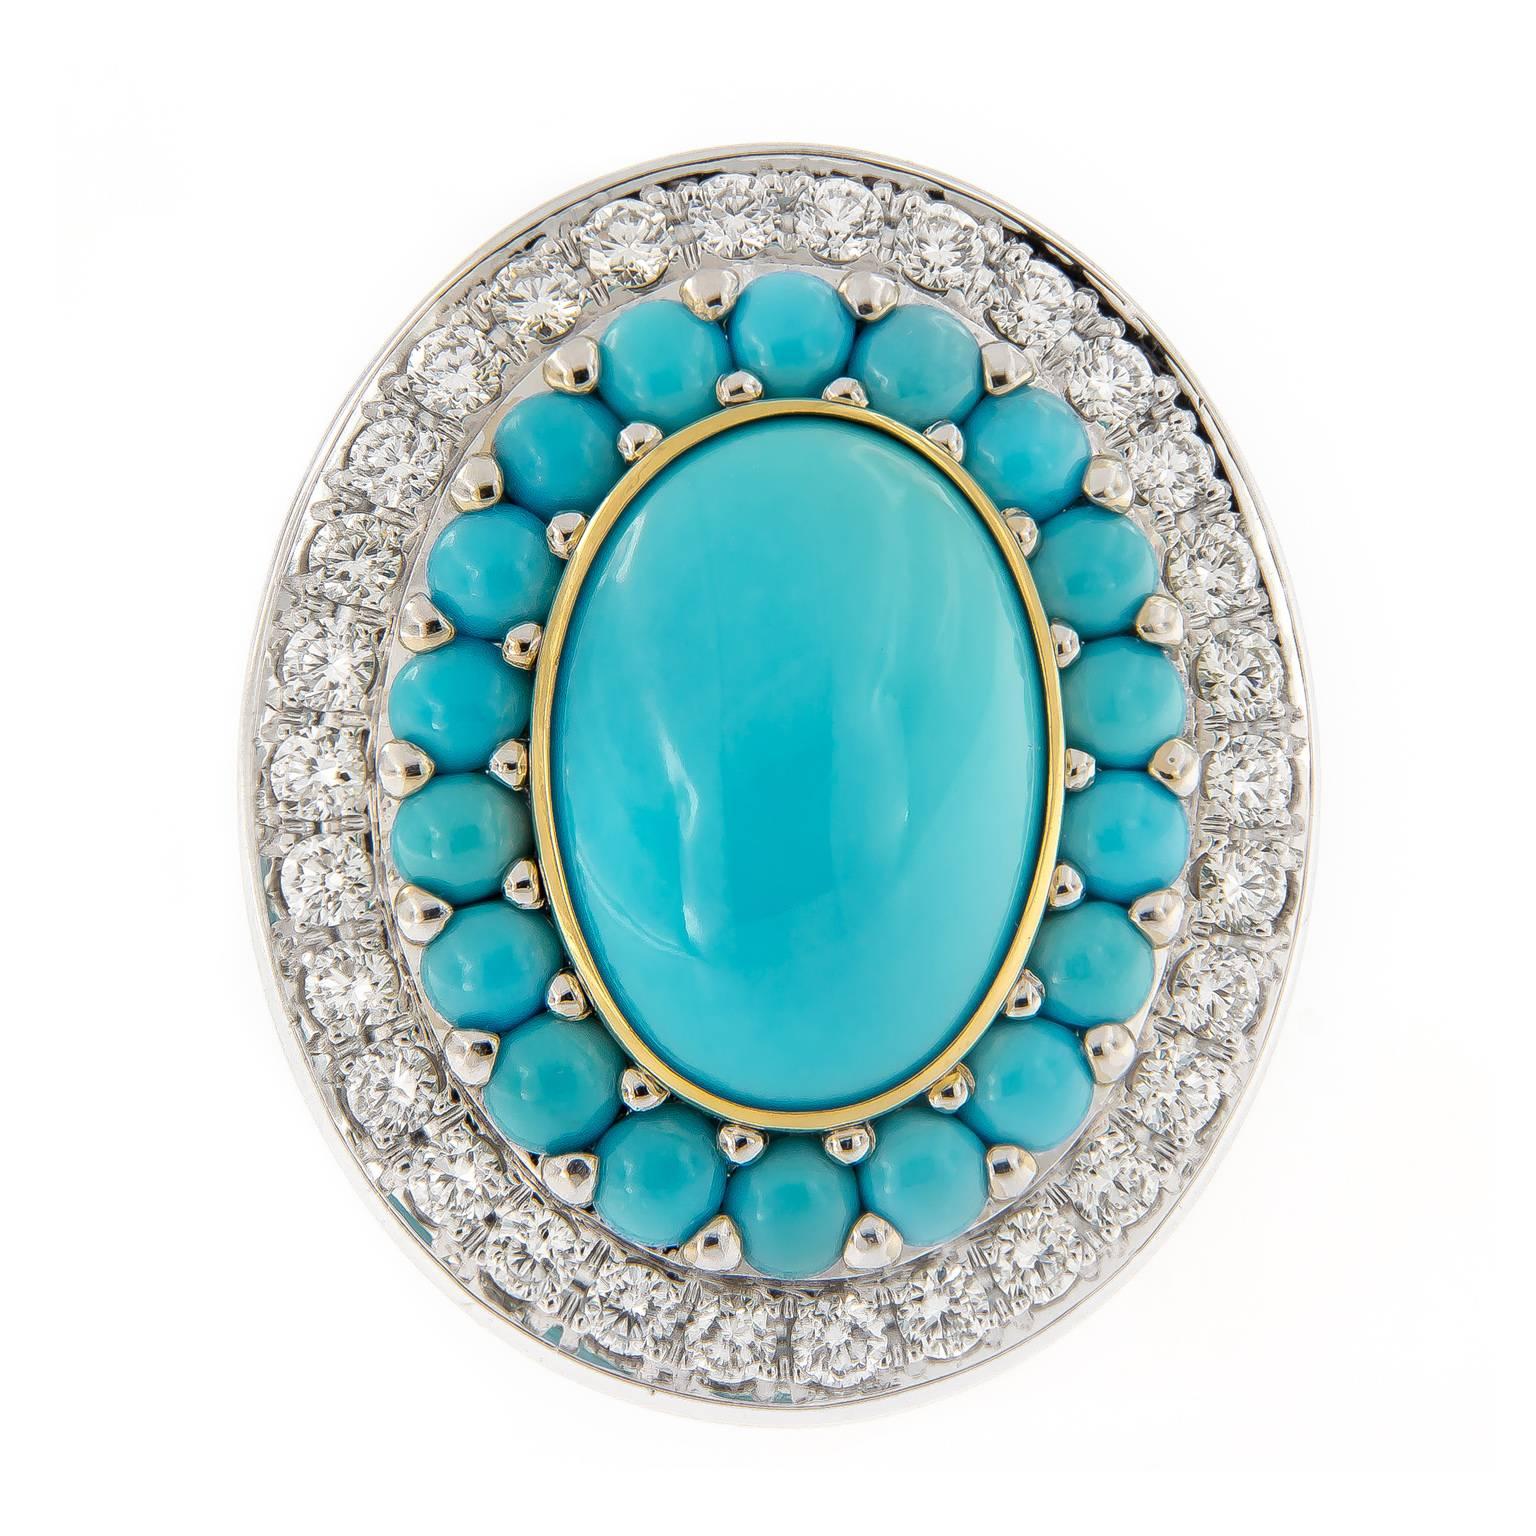 Outstanding display of color and Italian craftsmanship. This ring centers around an oval turquoise accented with smaller turquoise and diamonds. Center stone is 18 mm x 12 mm and is set in a gold ring. Ring is constructed of 18k yellow gold with a